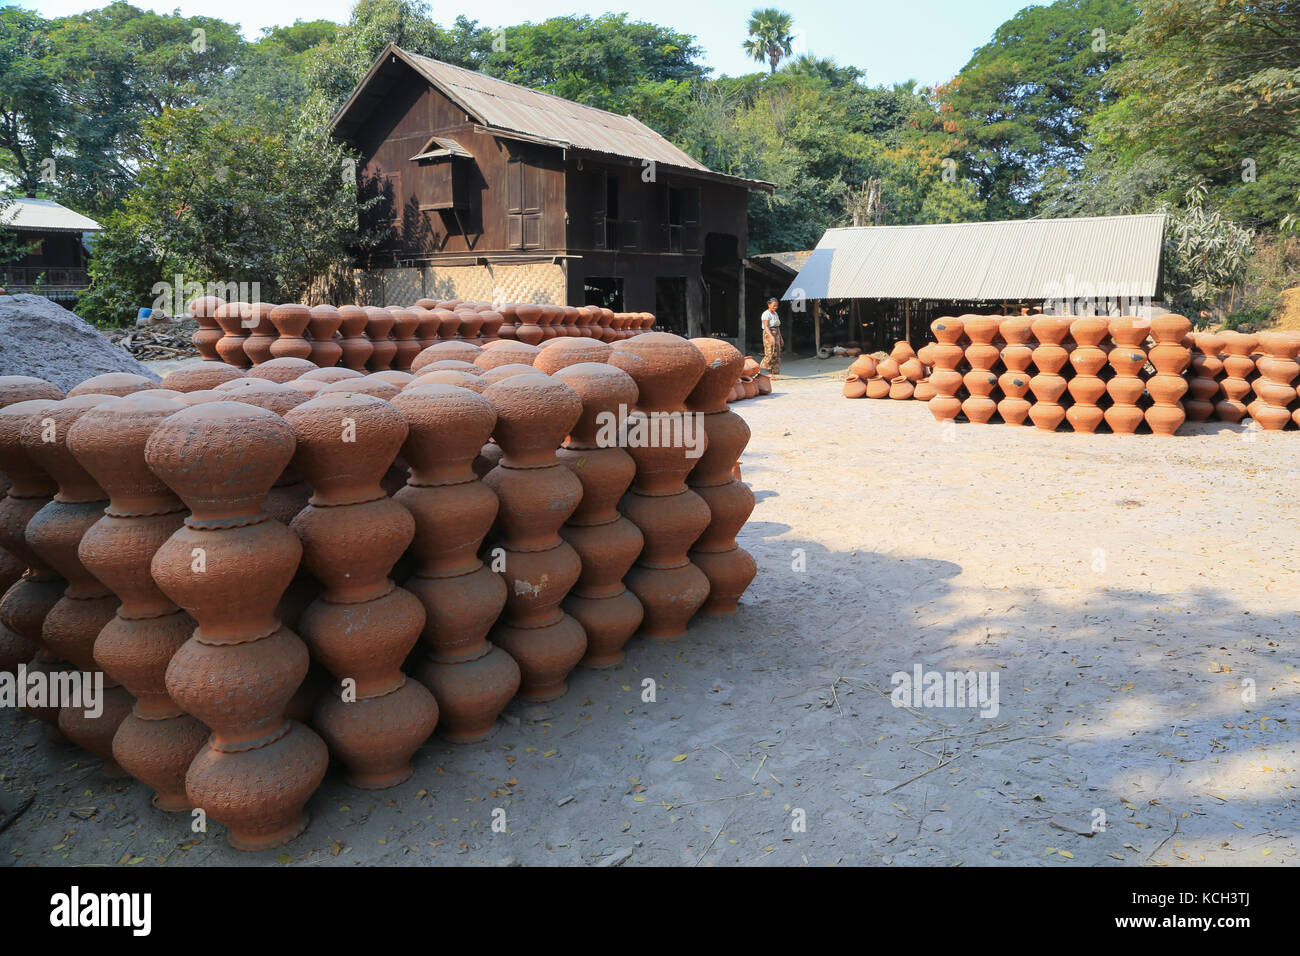 Pots cover the ground in Yandabo Village on the Irrawaddy River in Myanmar (Burma). Stock Photo